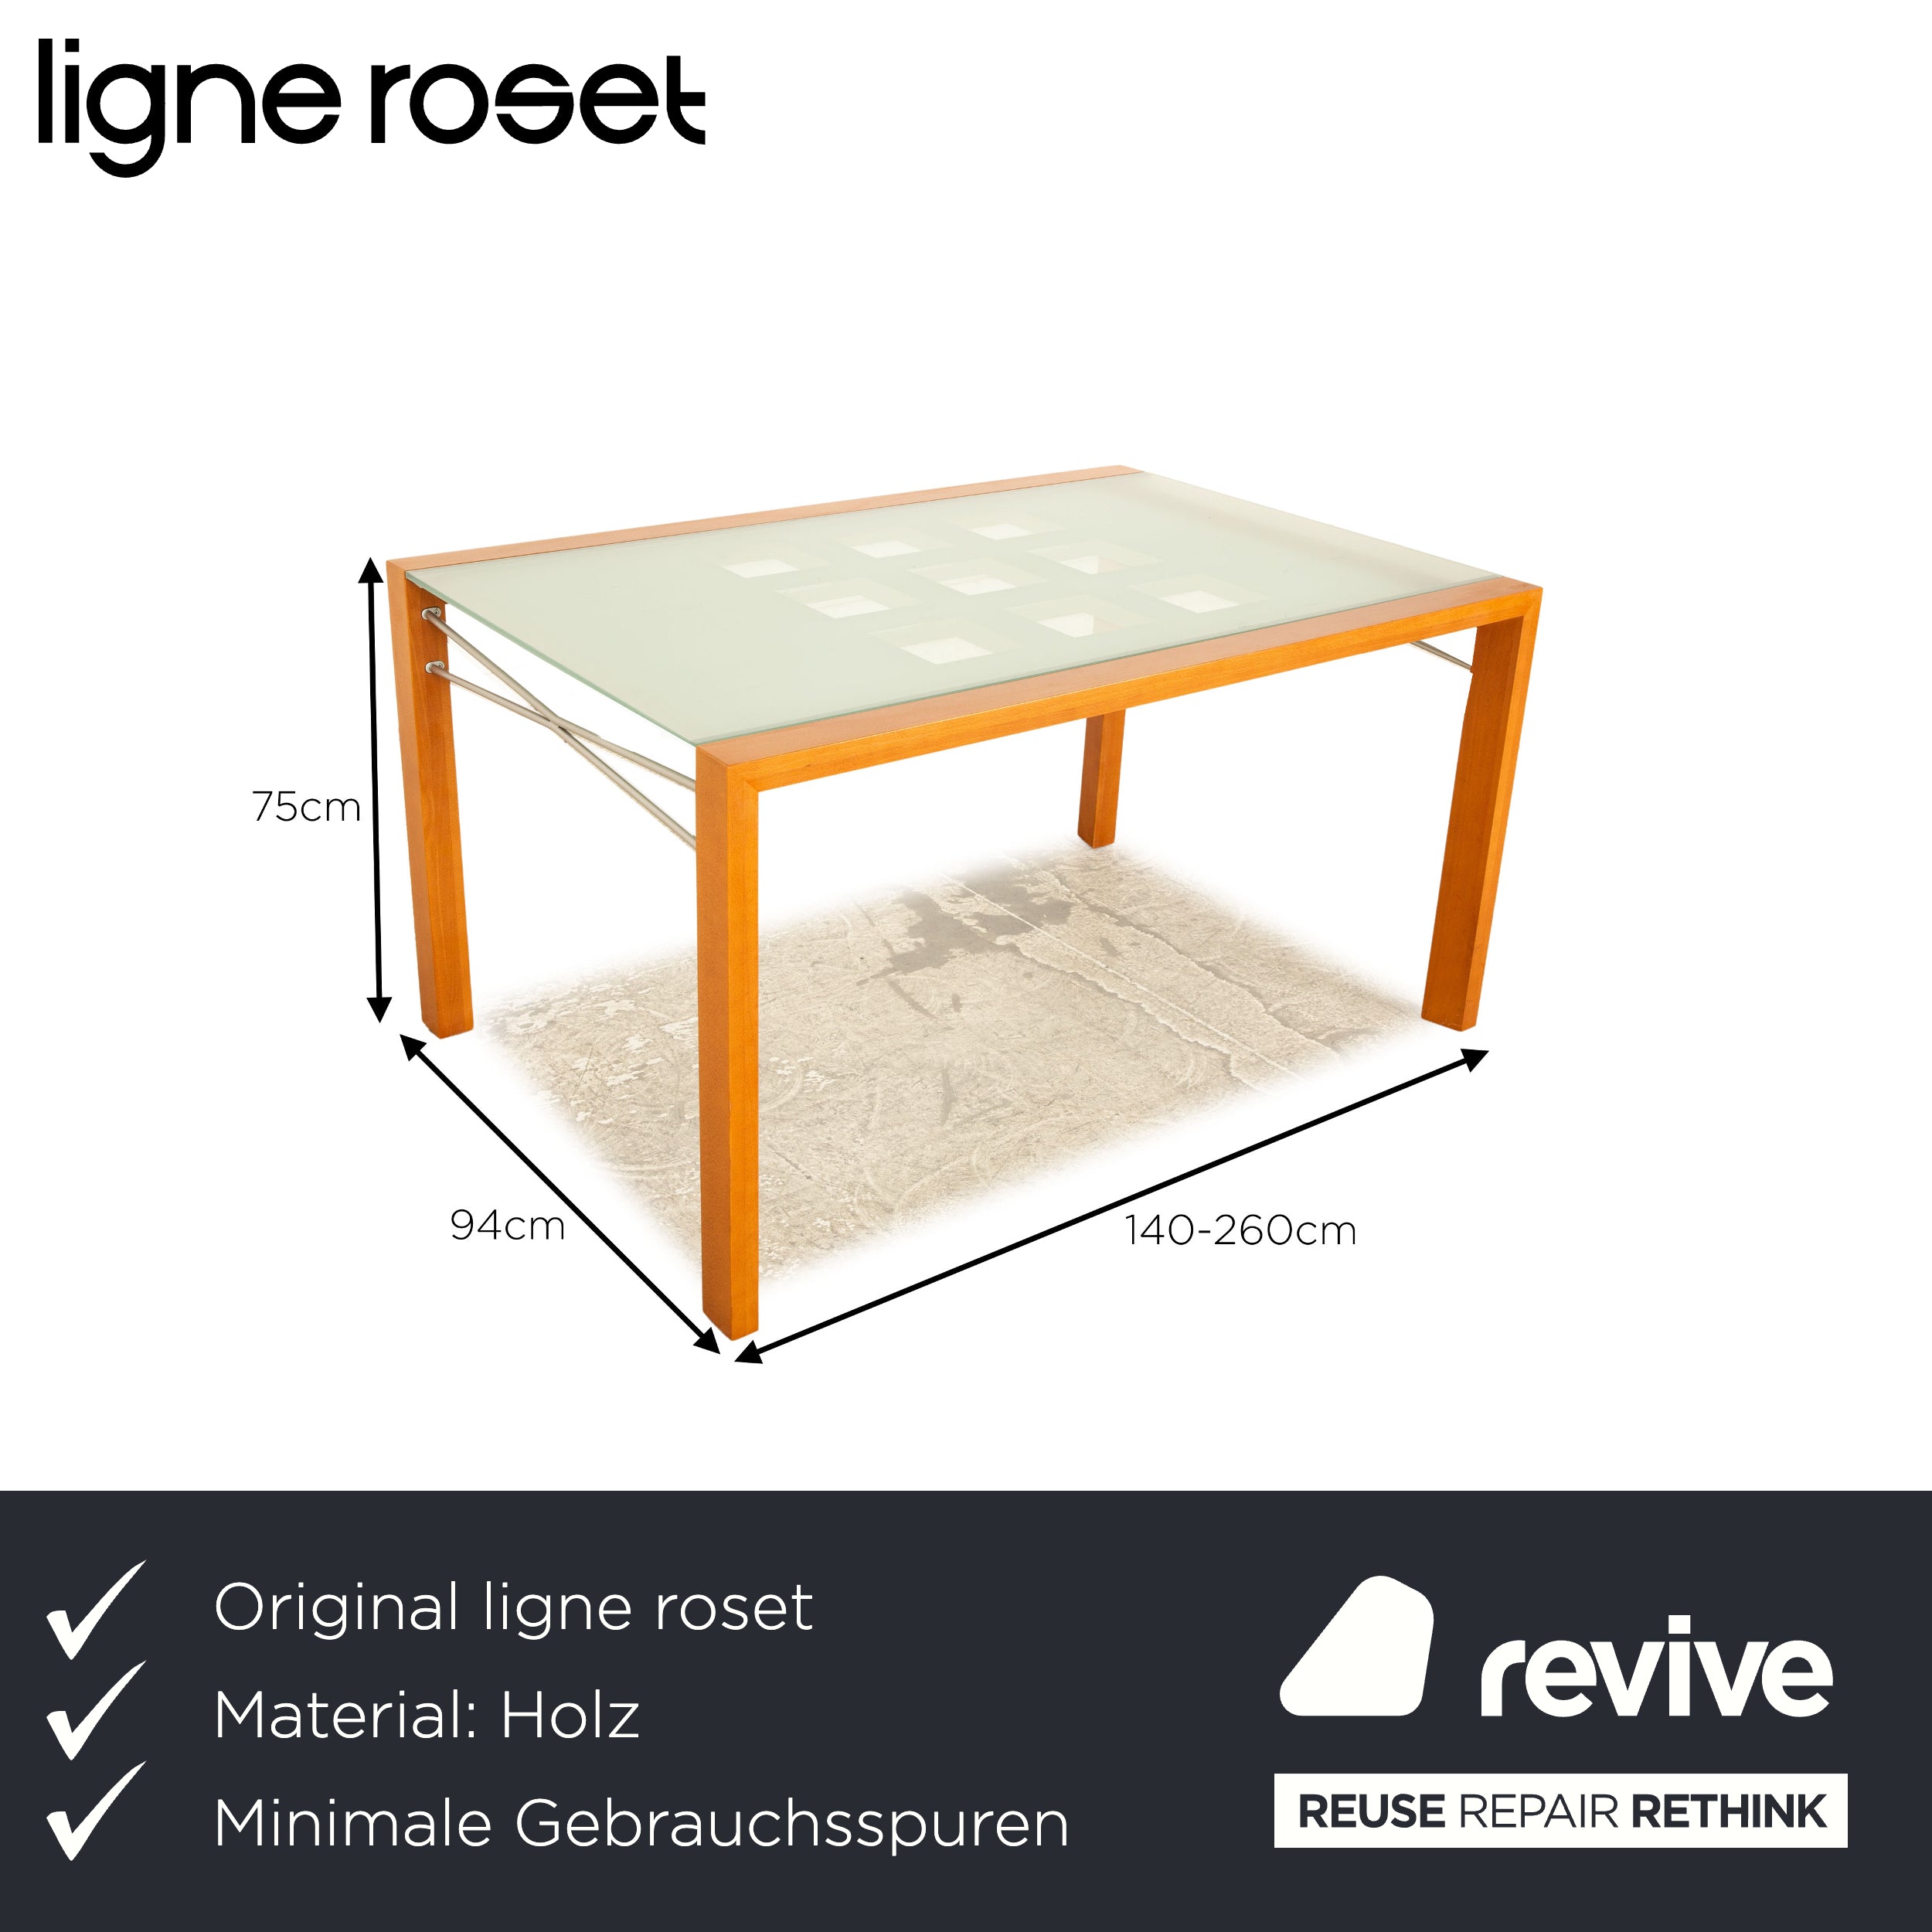 ligne roset Extensia wood table brown pull-out function 140/260 x 75 x 94